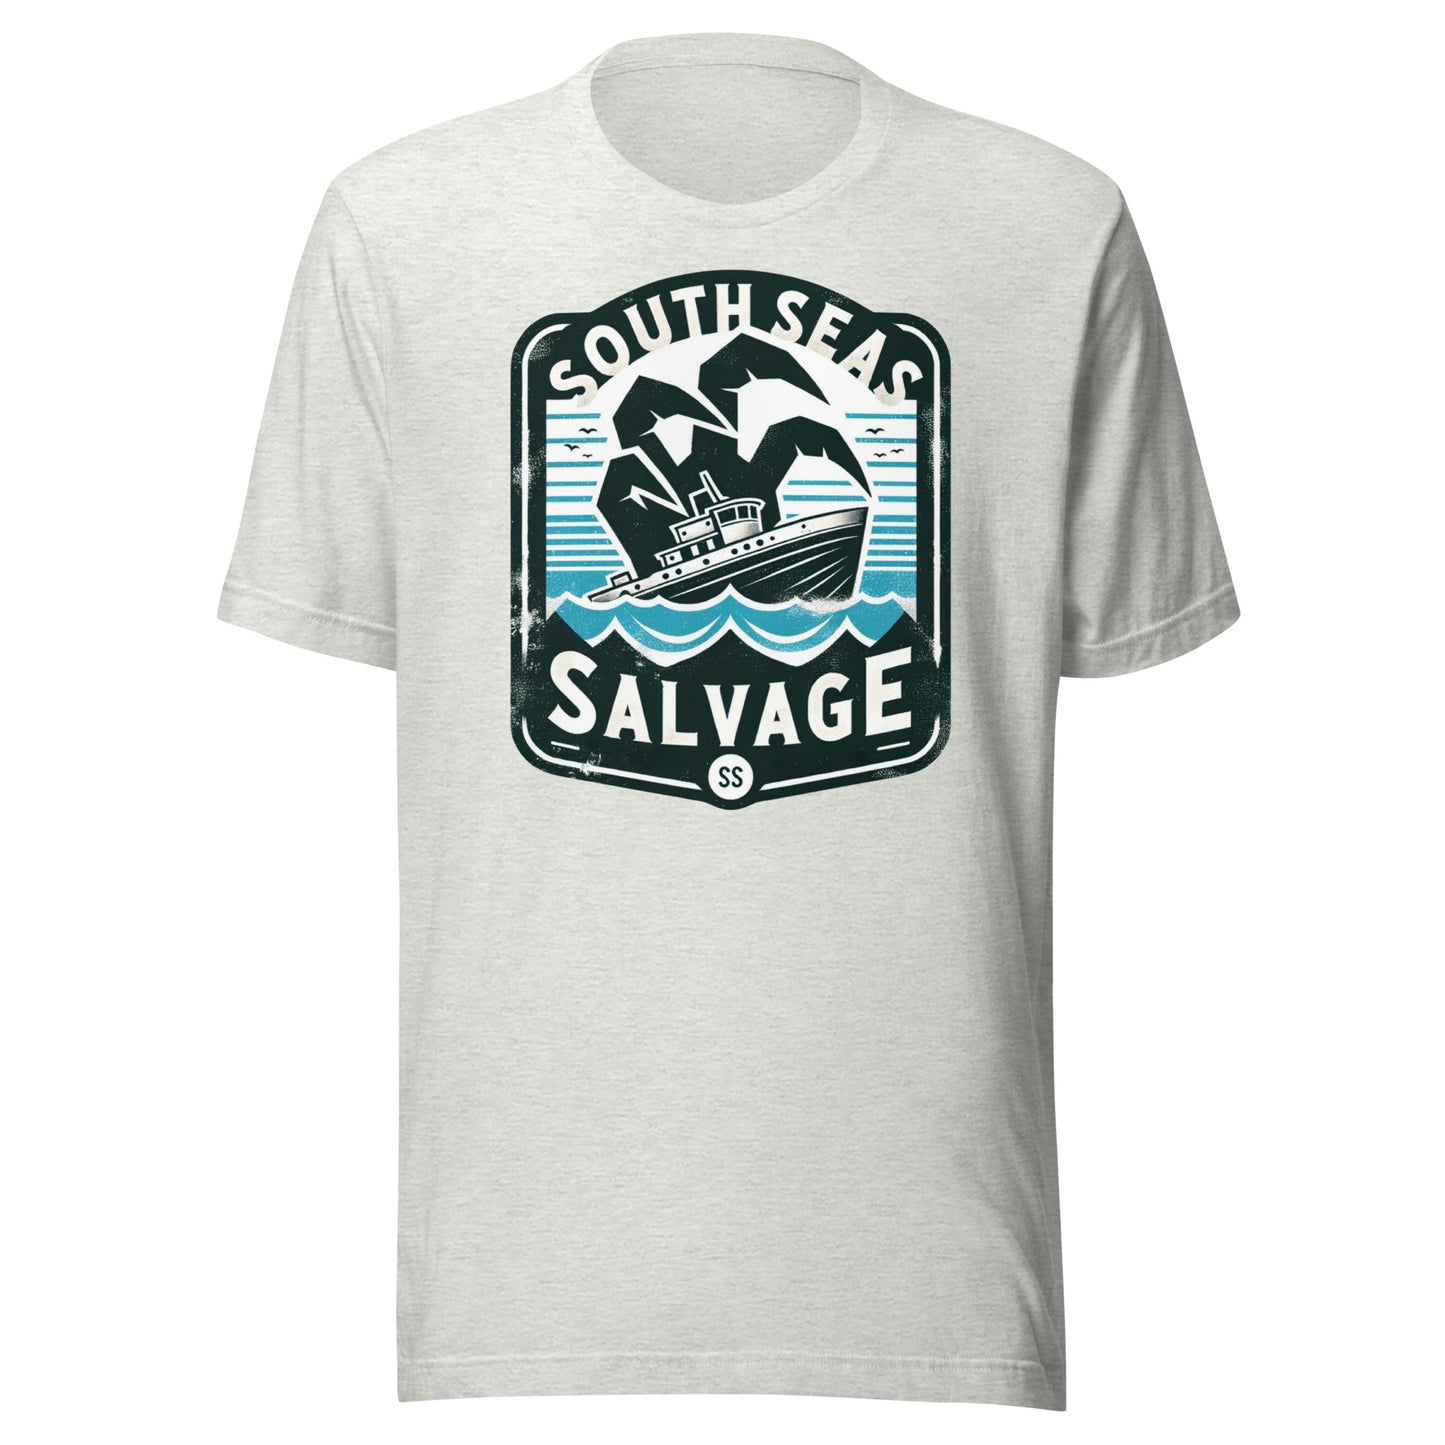 South Seas Salvage Company Surviving Monster Attacks Since 1954 Unisex t-shirt